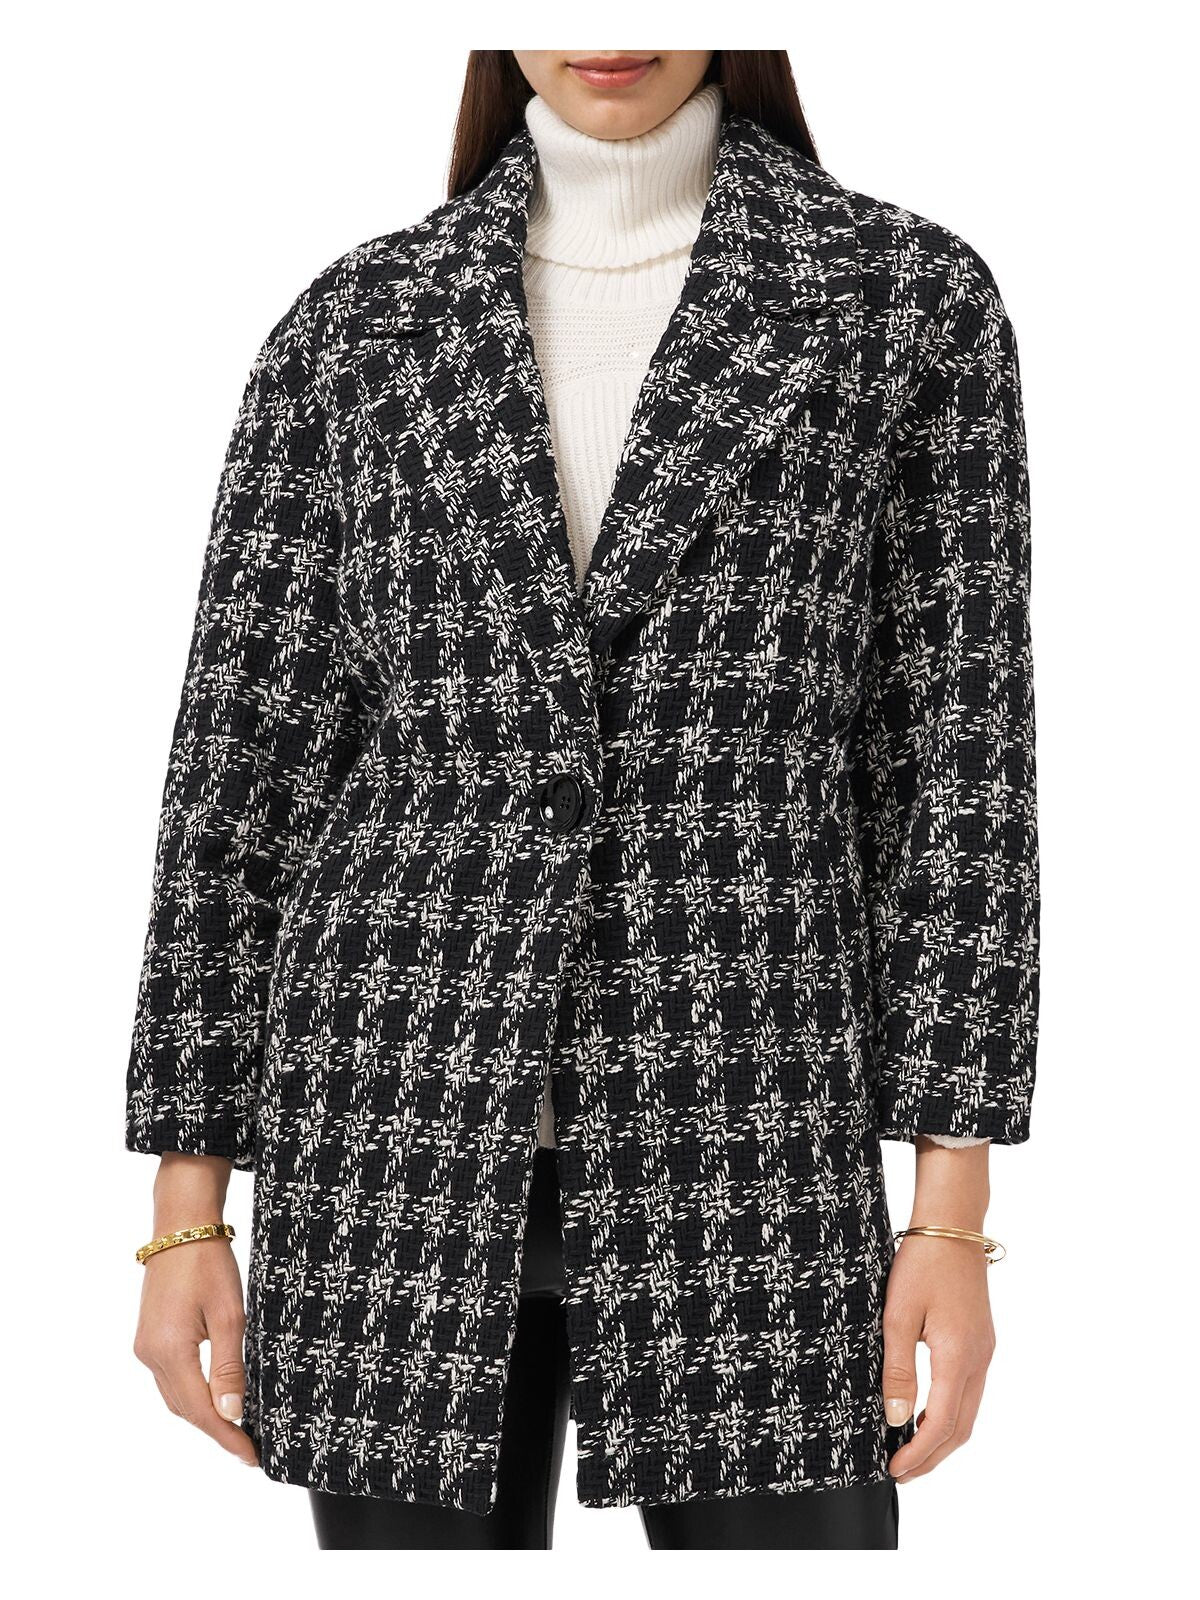 VINCE CAMUTO Womens Black Pocketed Notch Lapels Long Sleeves Lined Houndstooth Jacket L